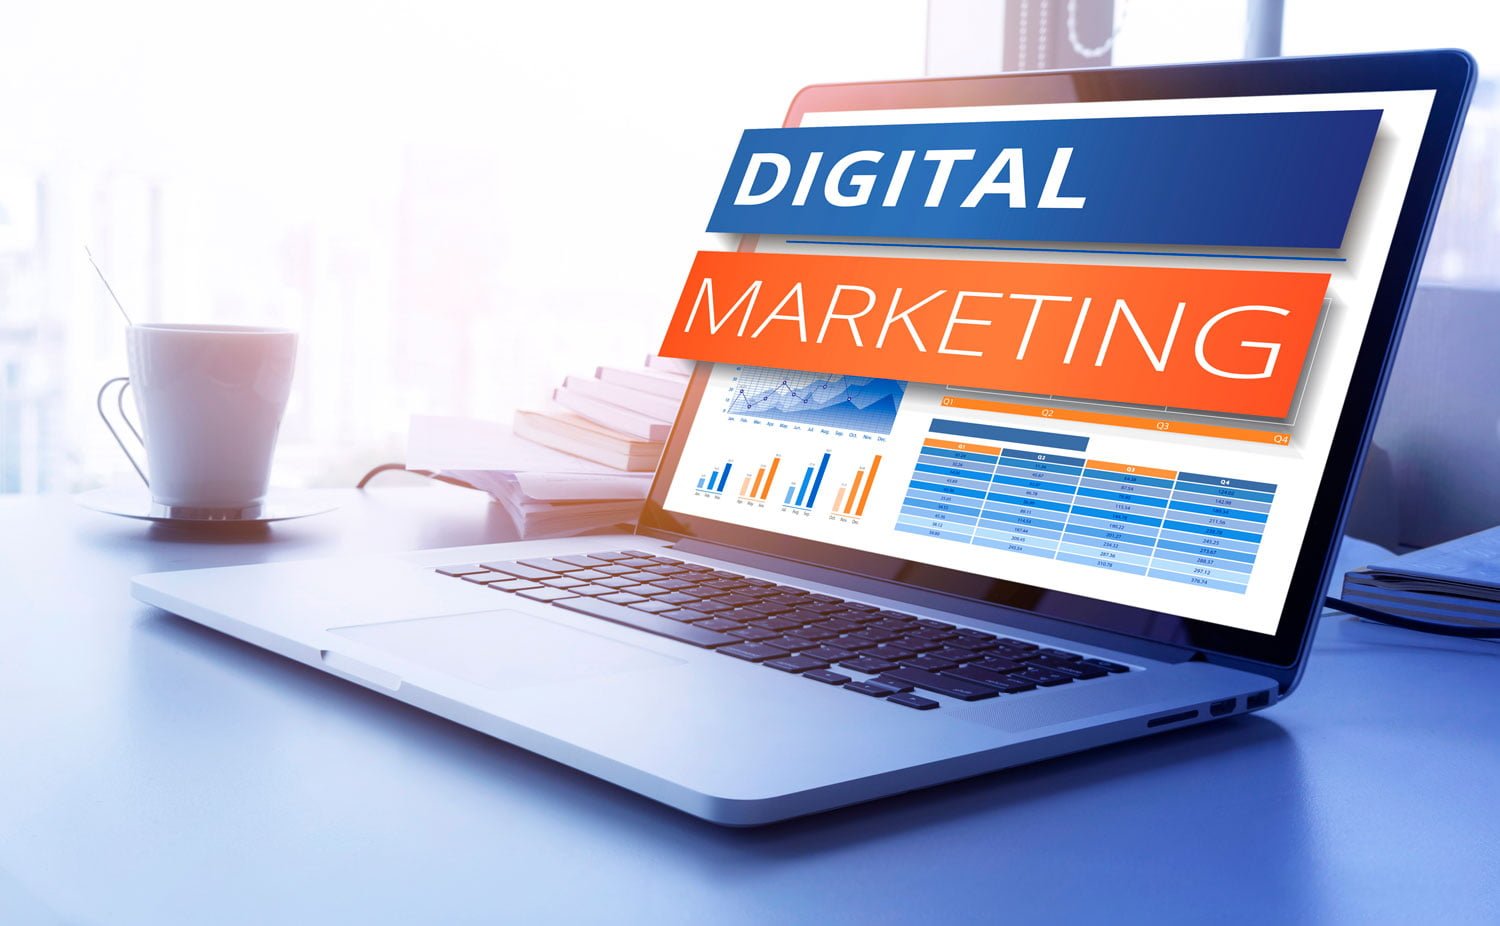 What are the benefits of using a digital marketing service?